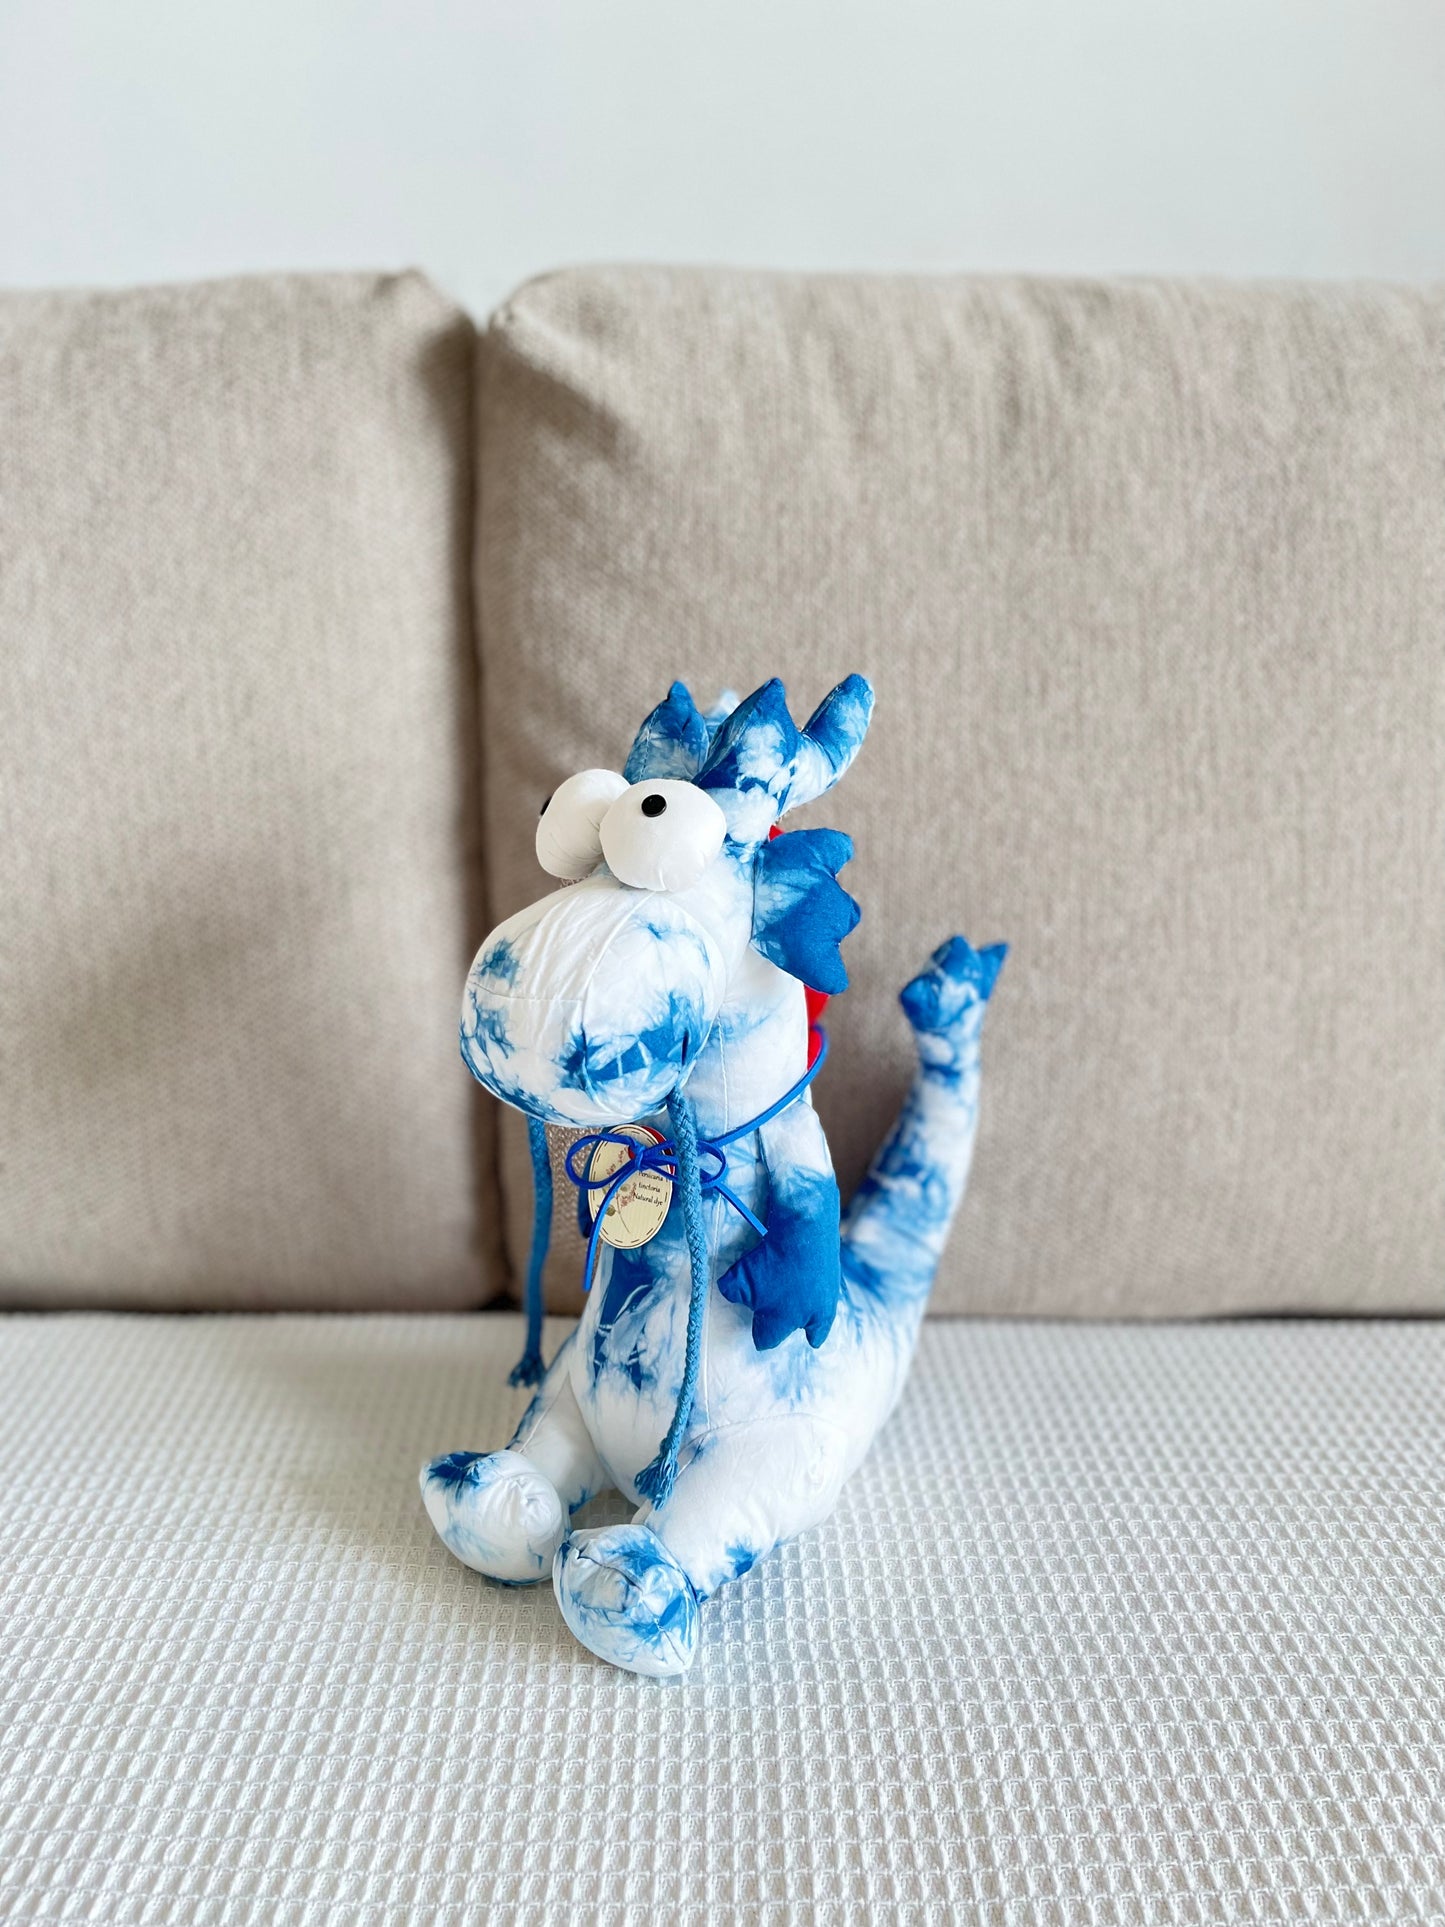 Natural cotton baby dragon doll made with indigo botanical dyed fabric. Lovely stuffed soft dragon toy. A new born / easter basket gift.